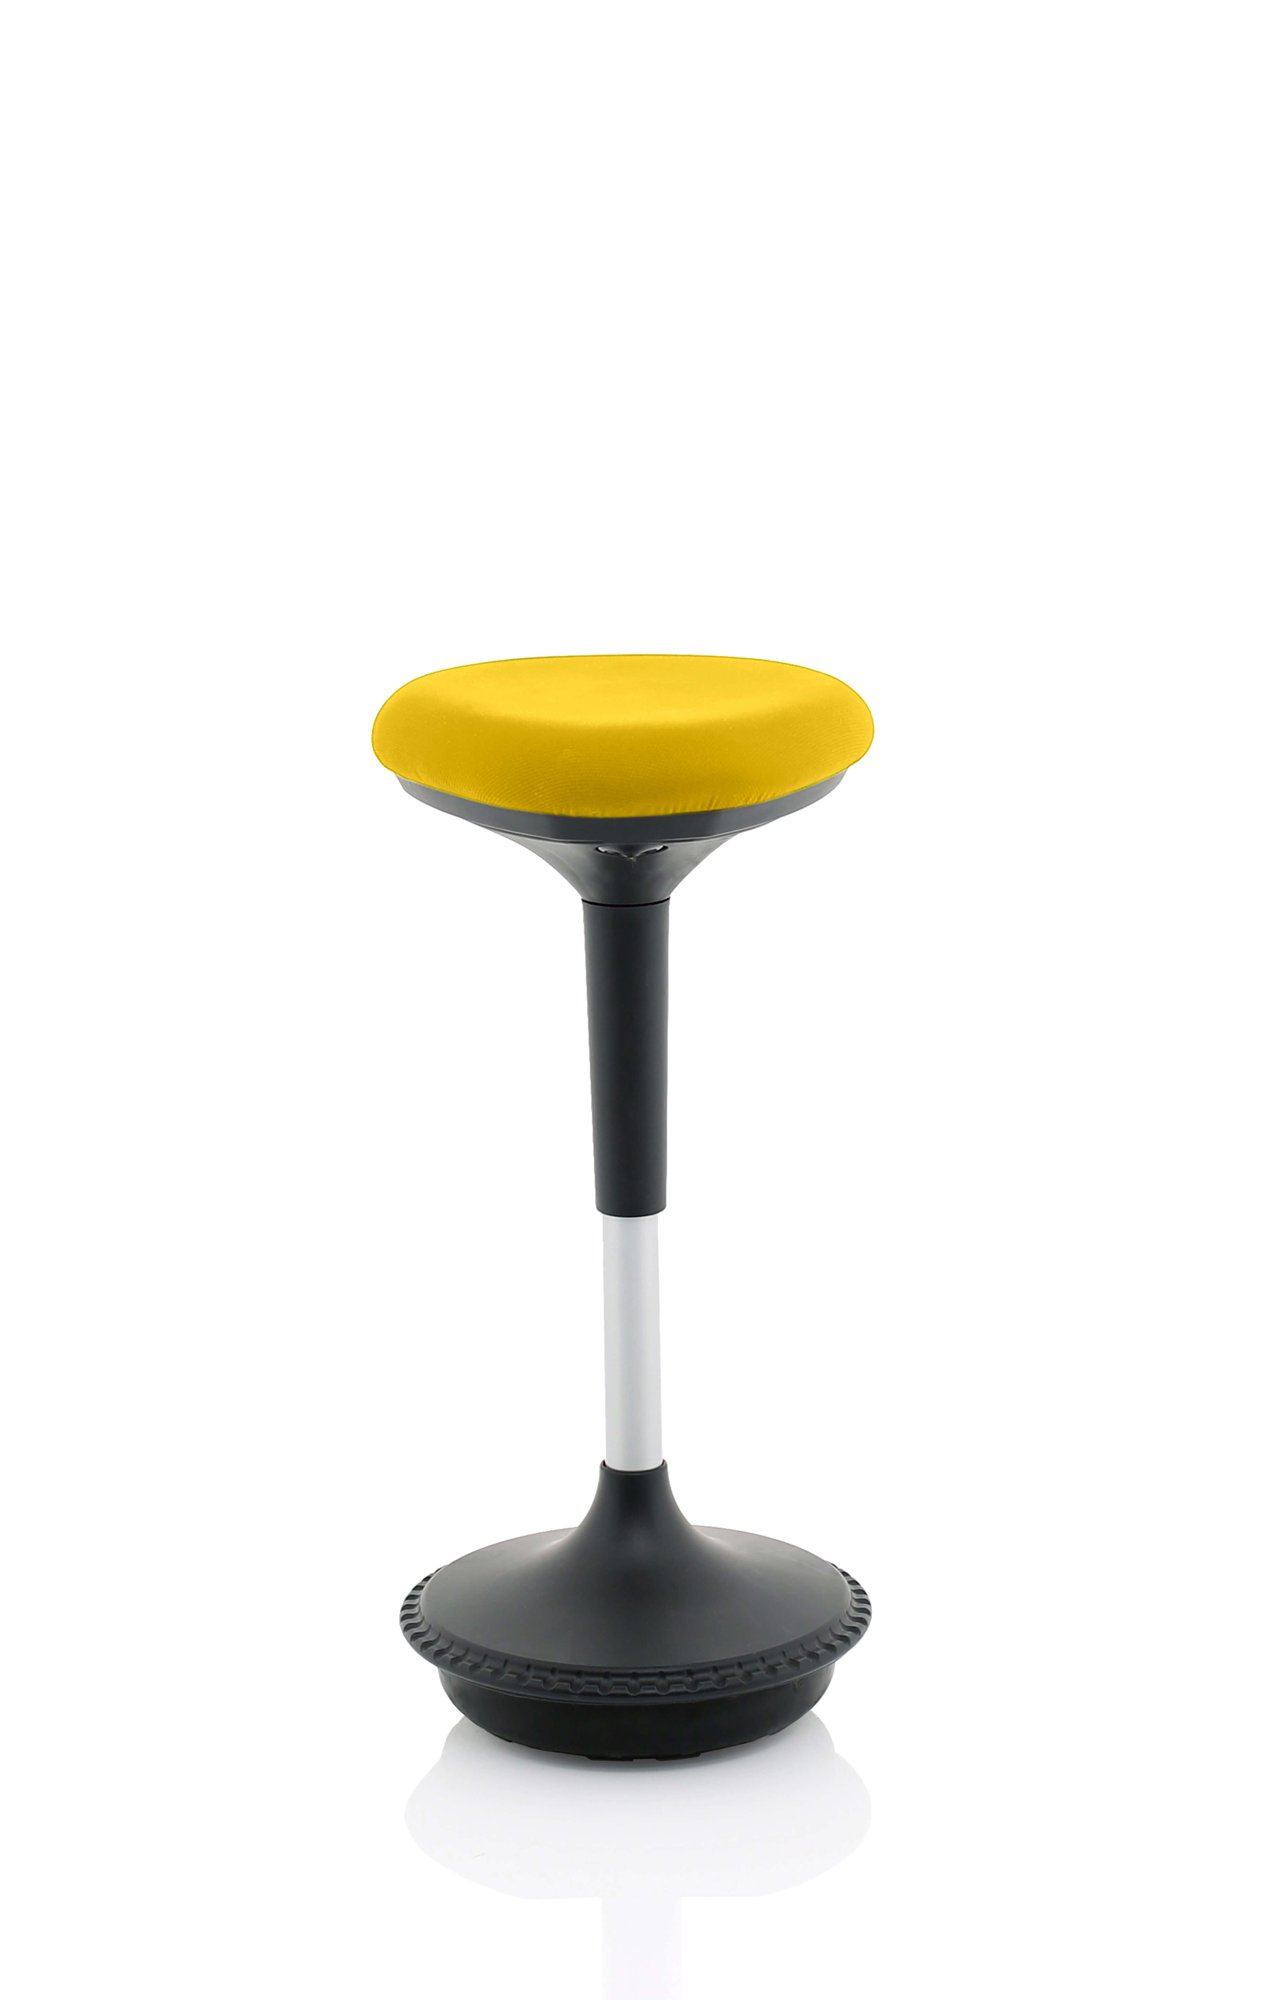 Sitall Deluxe Visitor Stool Bespoke Seat Senna Yellow KCUP1552